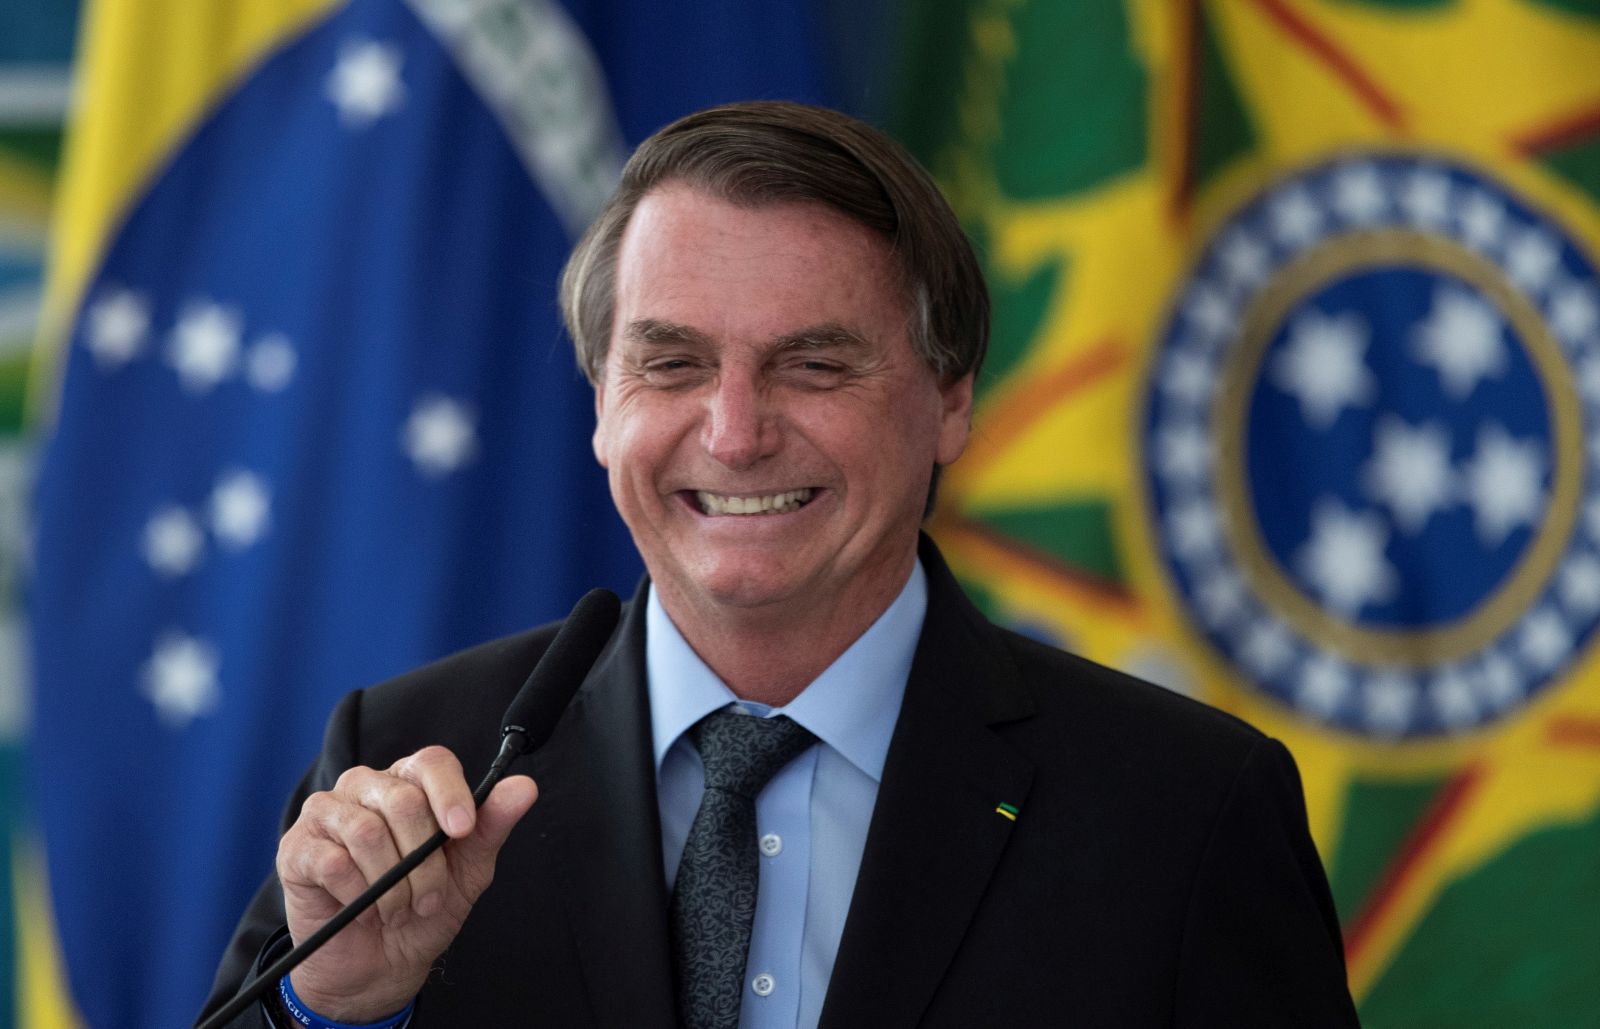 epa09090278 Brazilian President Jair Bolsonaro participates in an investment announcement for the Aguas Brasileiras Program on increasing the quantity and quality of water available for consumption, at the Palacio do Planalto, in the city of Brasilia, Brazil, 22 March 2021.  EPA/Joedson Alves